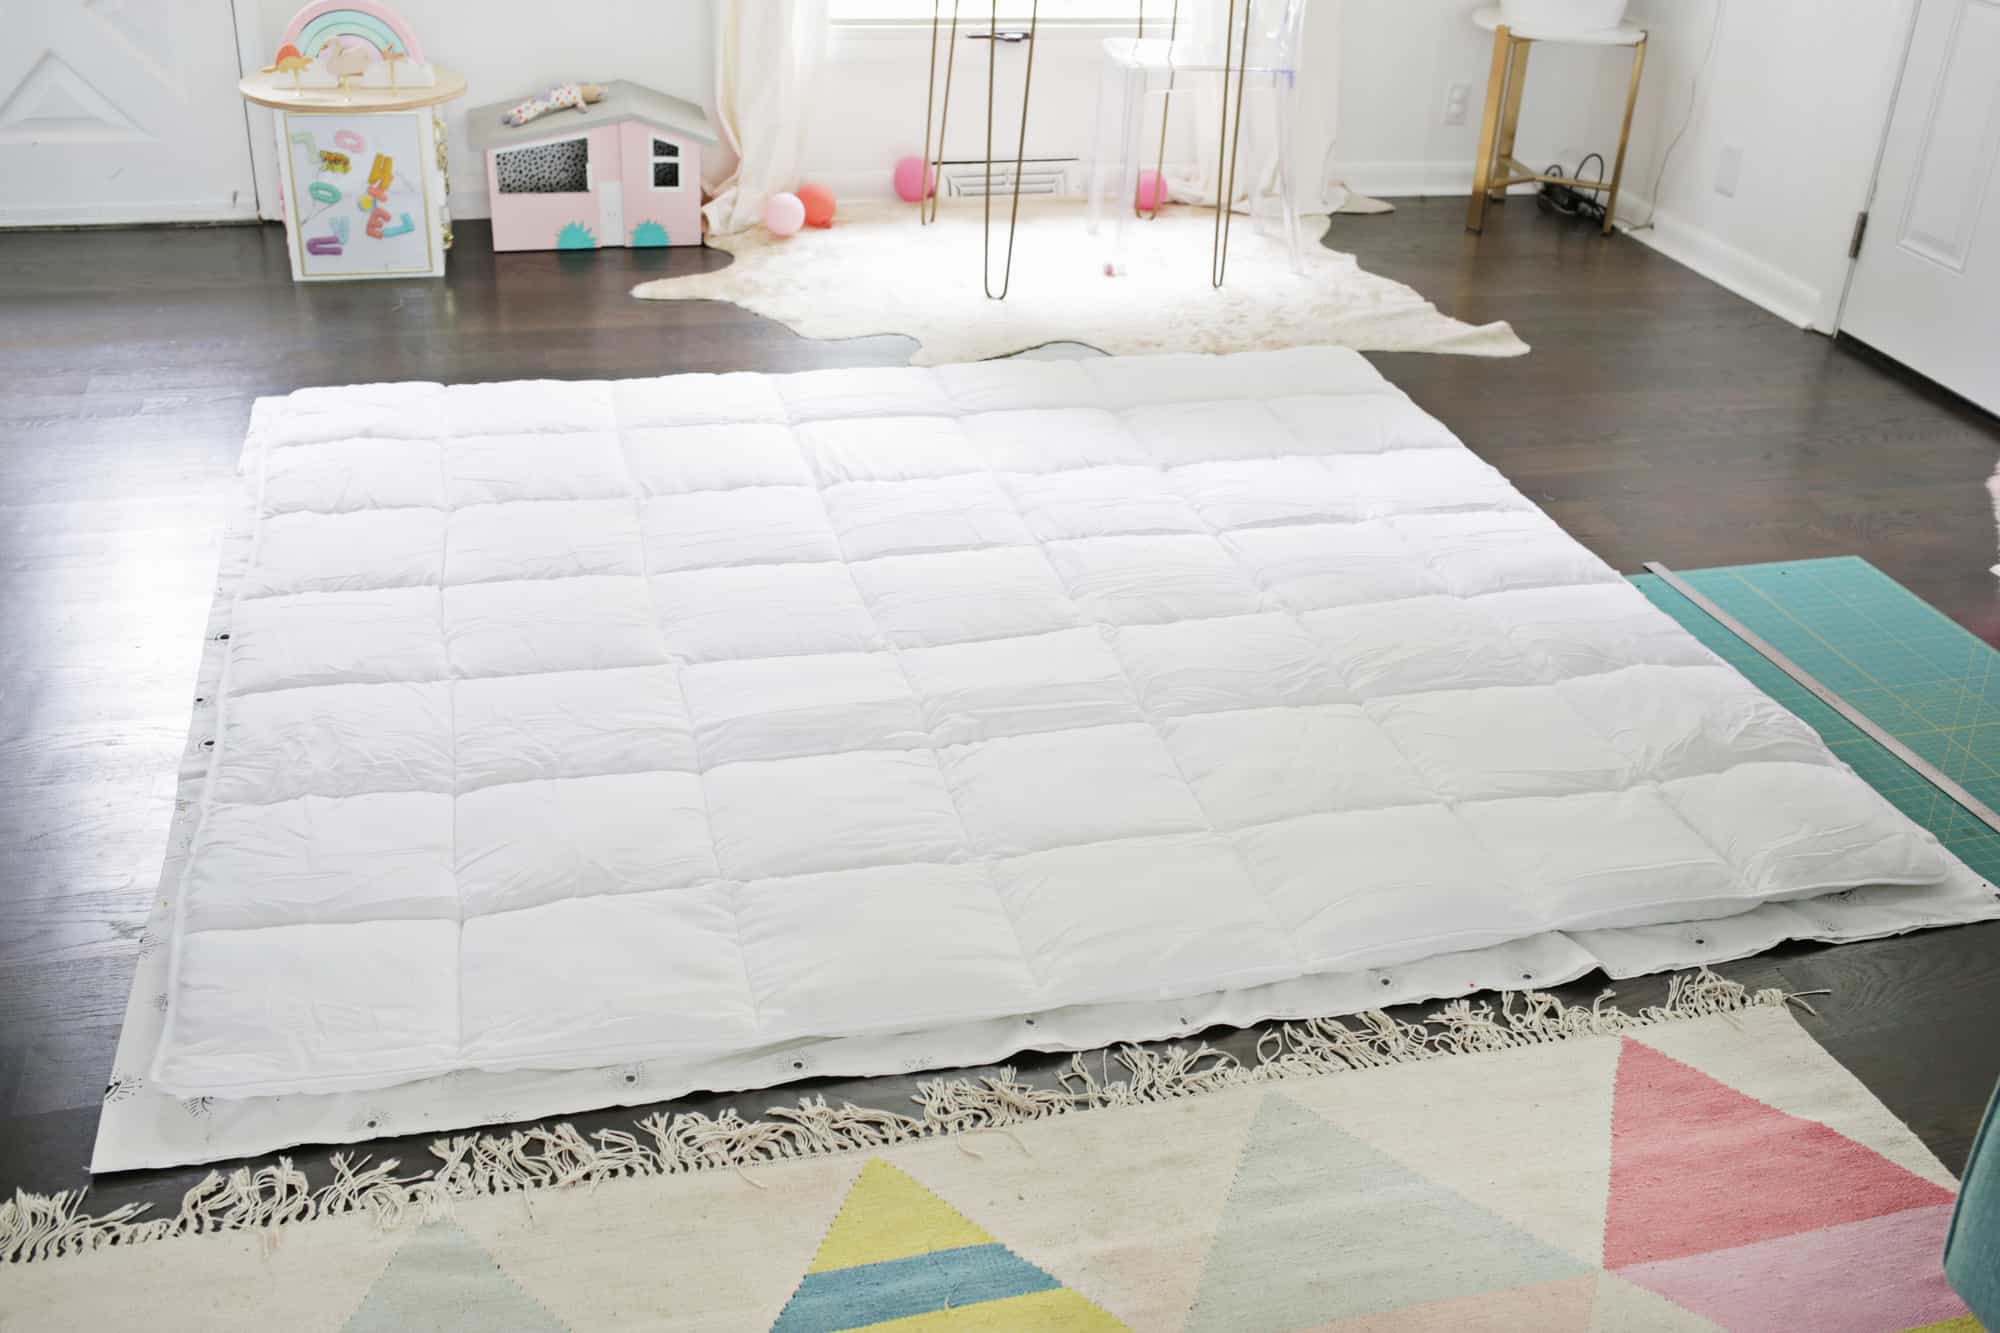 Easy Duvet Cover With Any Flat Sheet, Can You Make A Duvet Cover Out Of Sheets